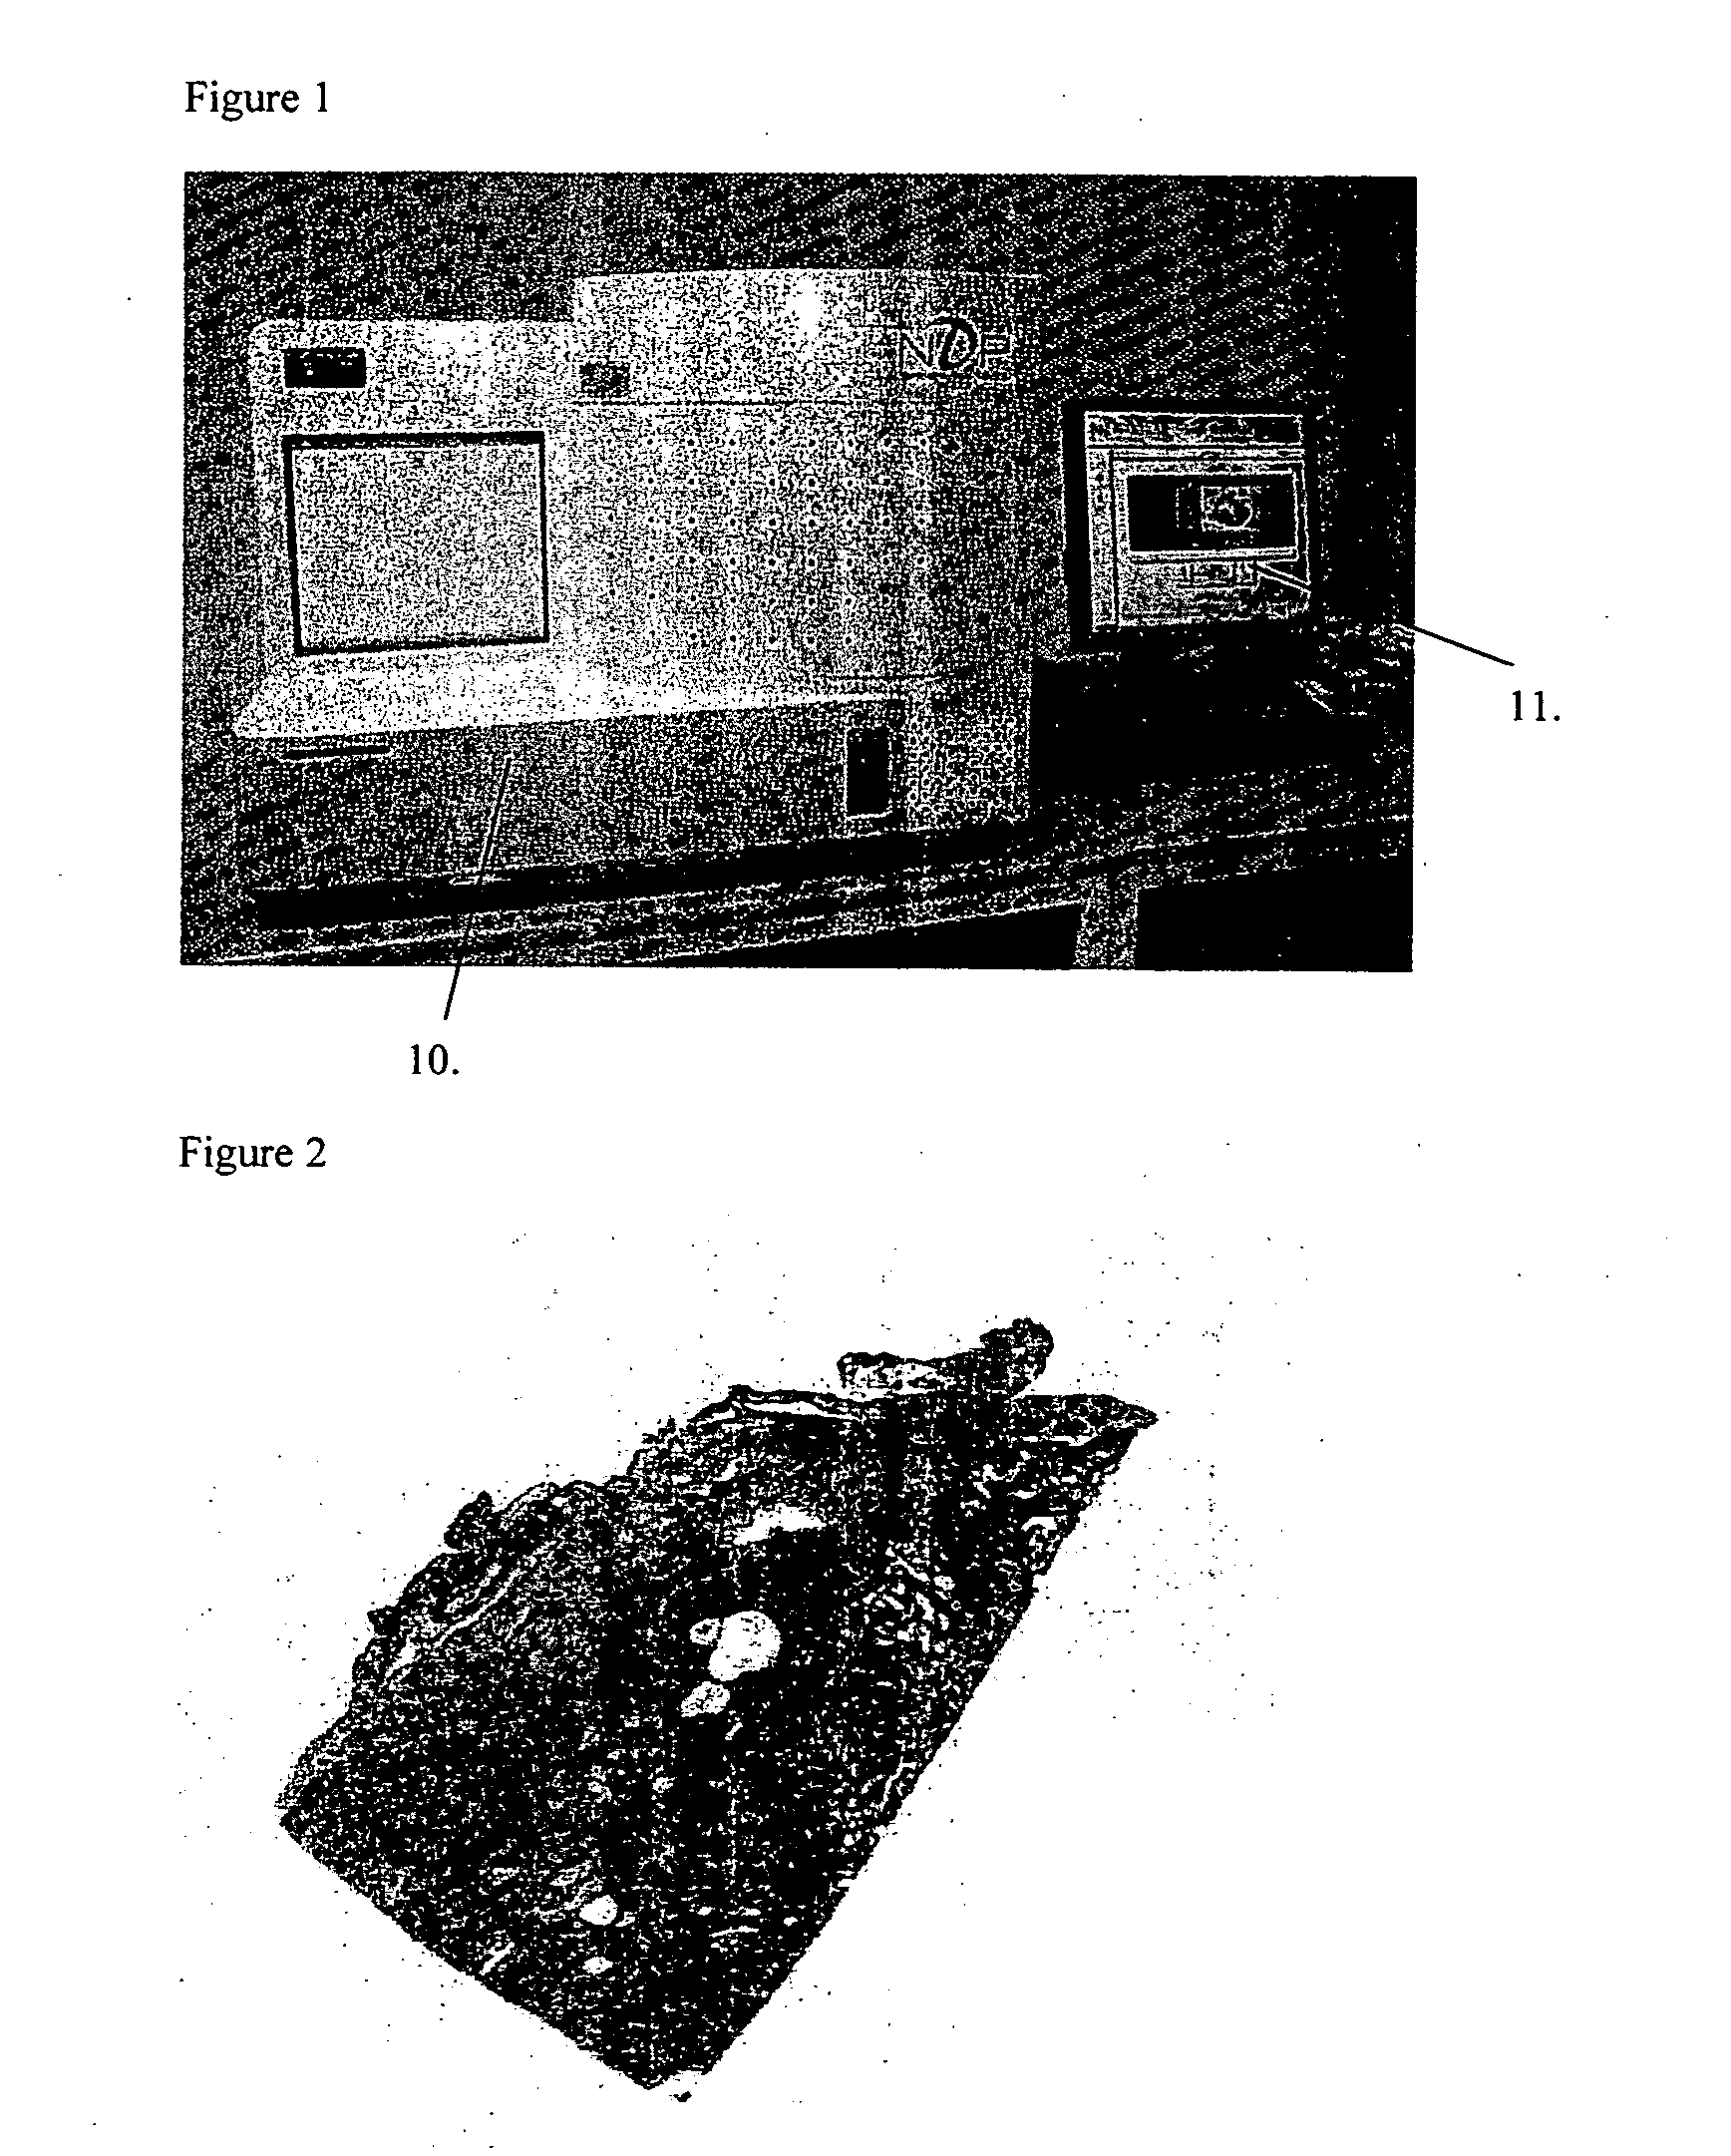 Method and apparatus for aligning microscope images